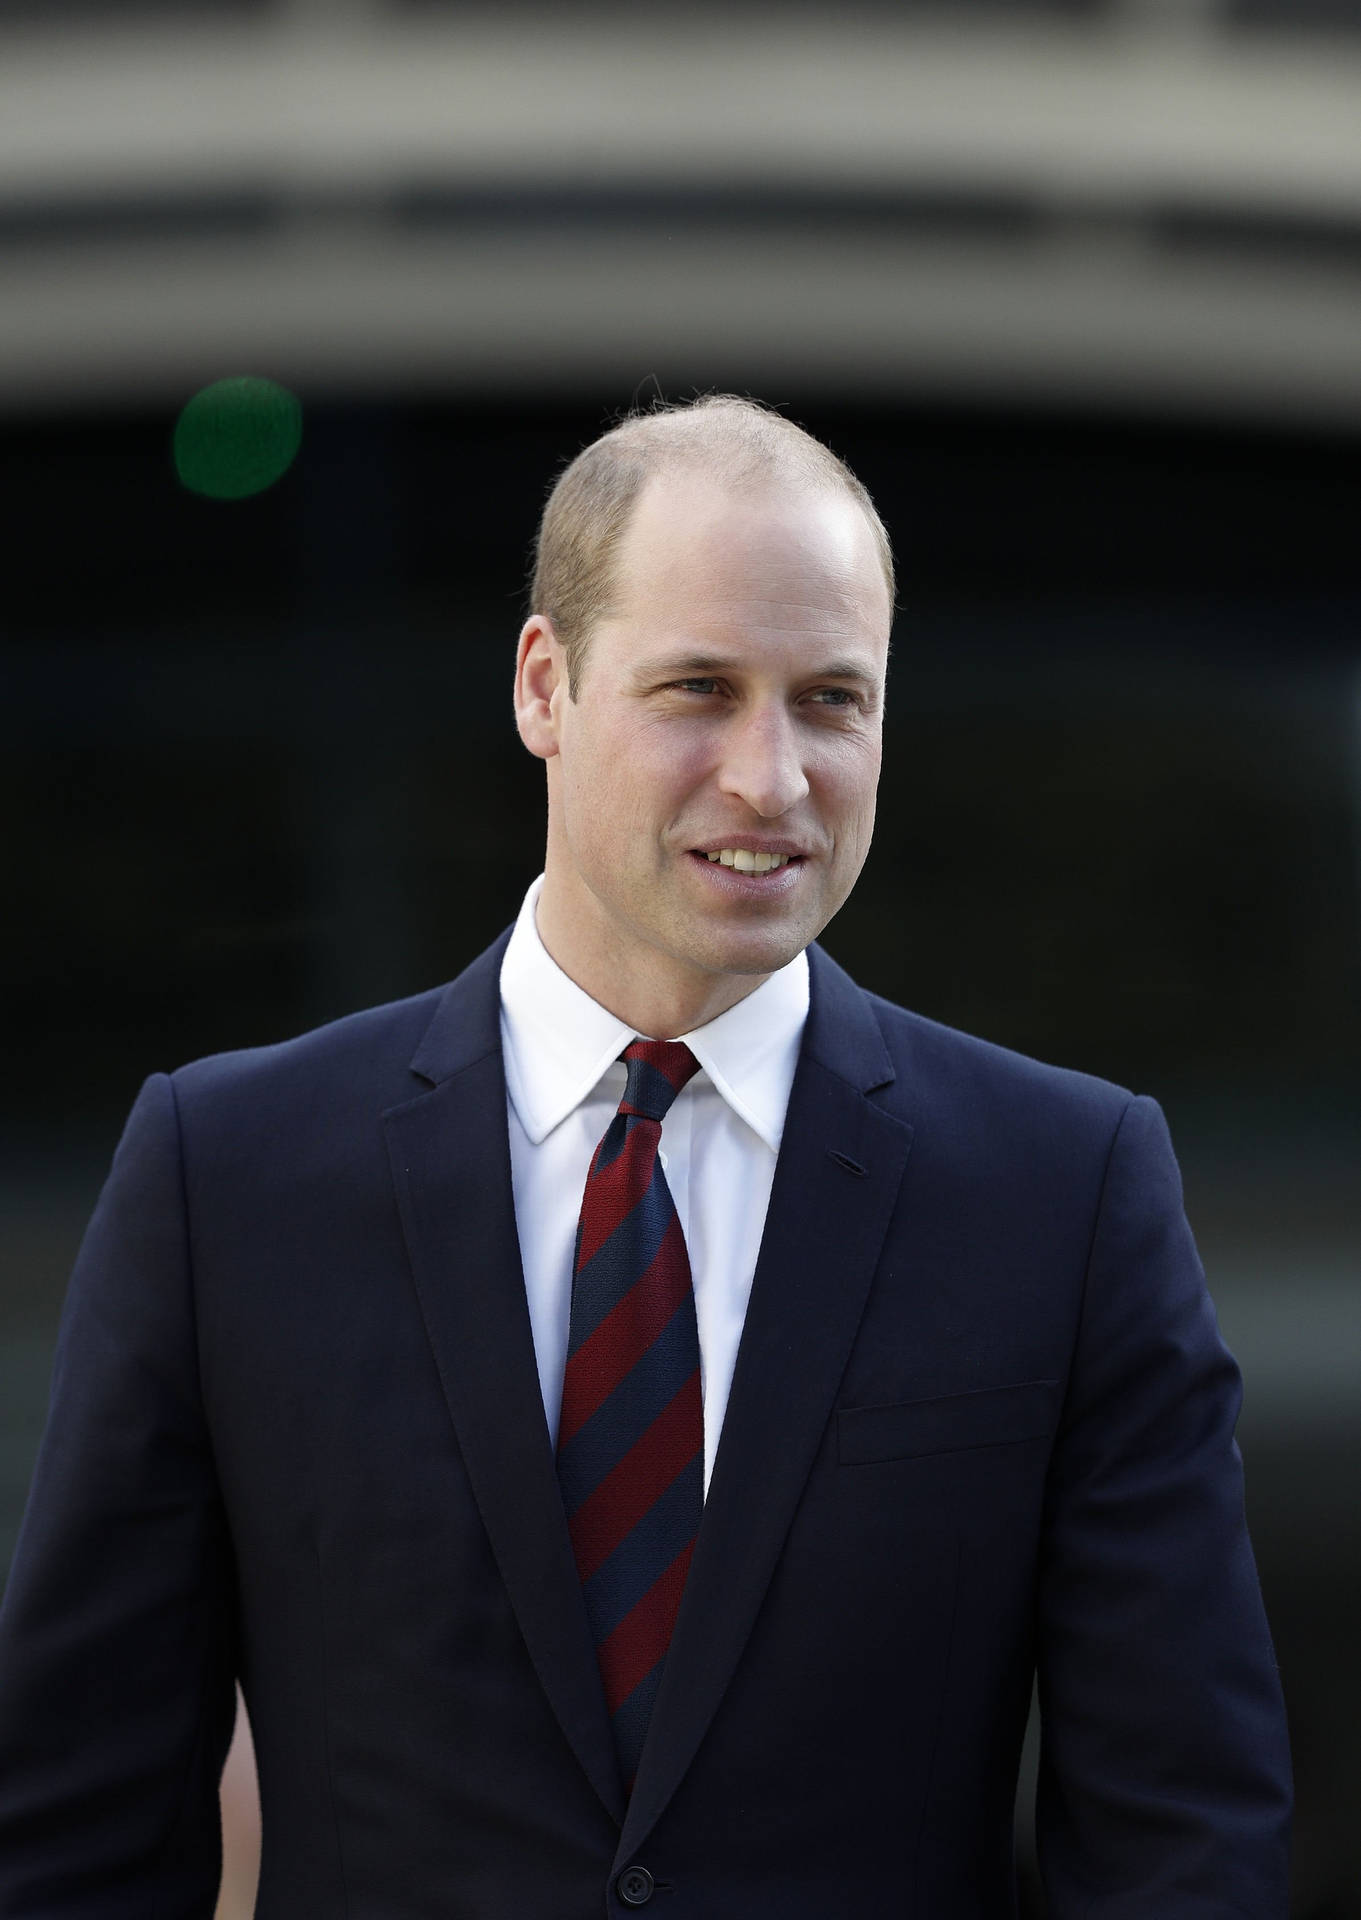 Prince William Wearing Suit And Tie Background